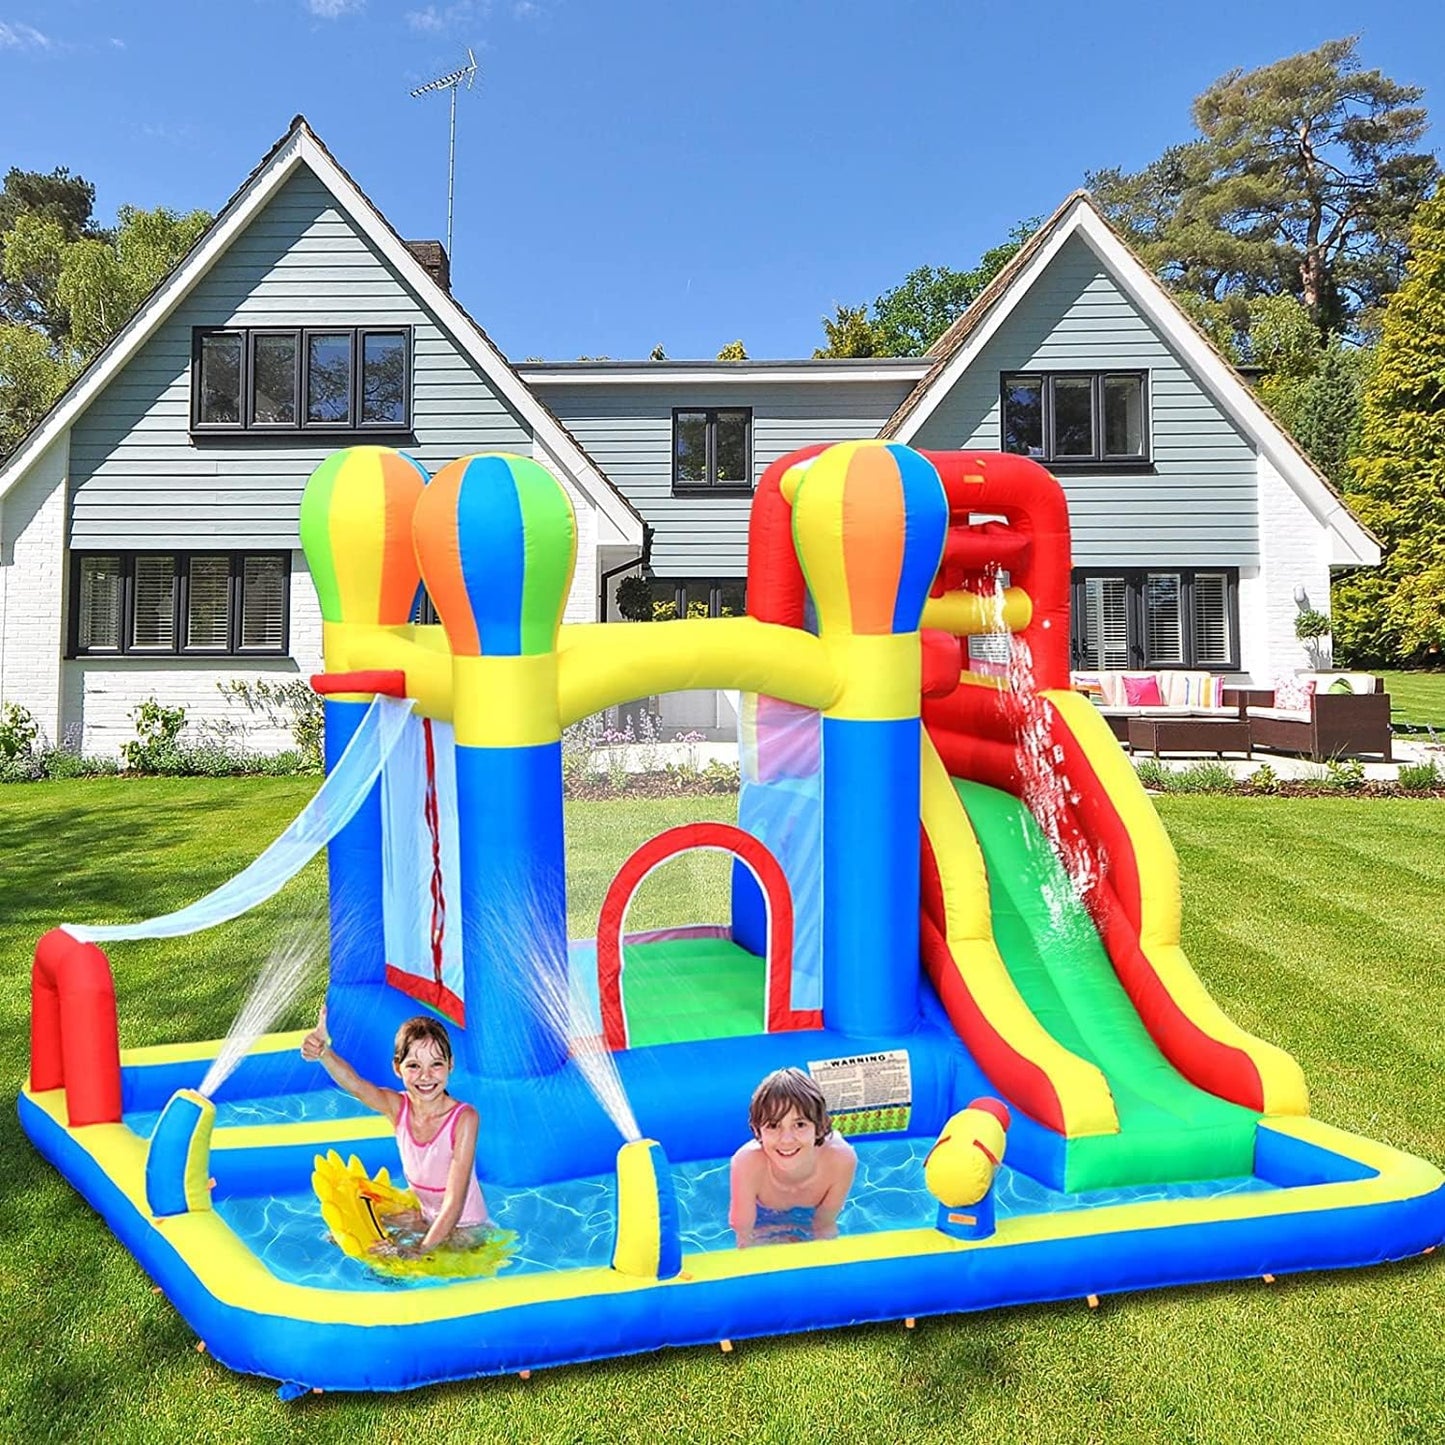 Ballsea Bouncy Castle, Inflatable Bounce Castle House with Blower for Kids Age 3-8, Sweet House Design 3.35 x 2.8 x 2.06m